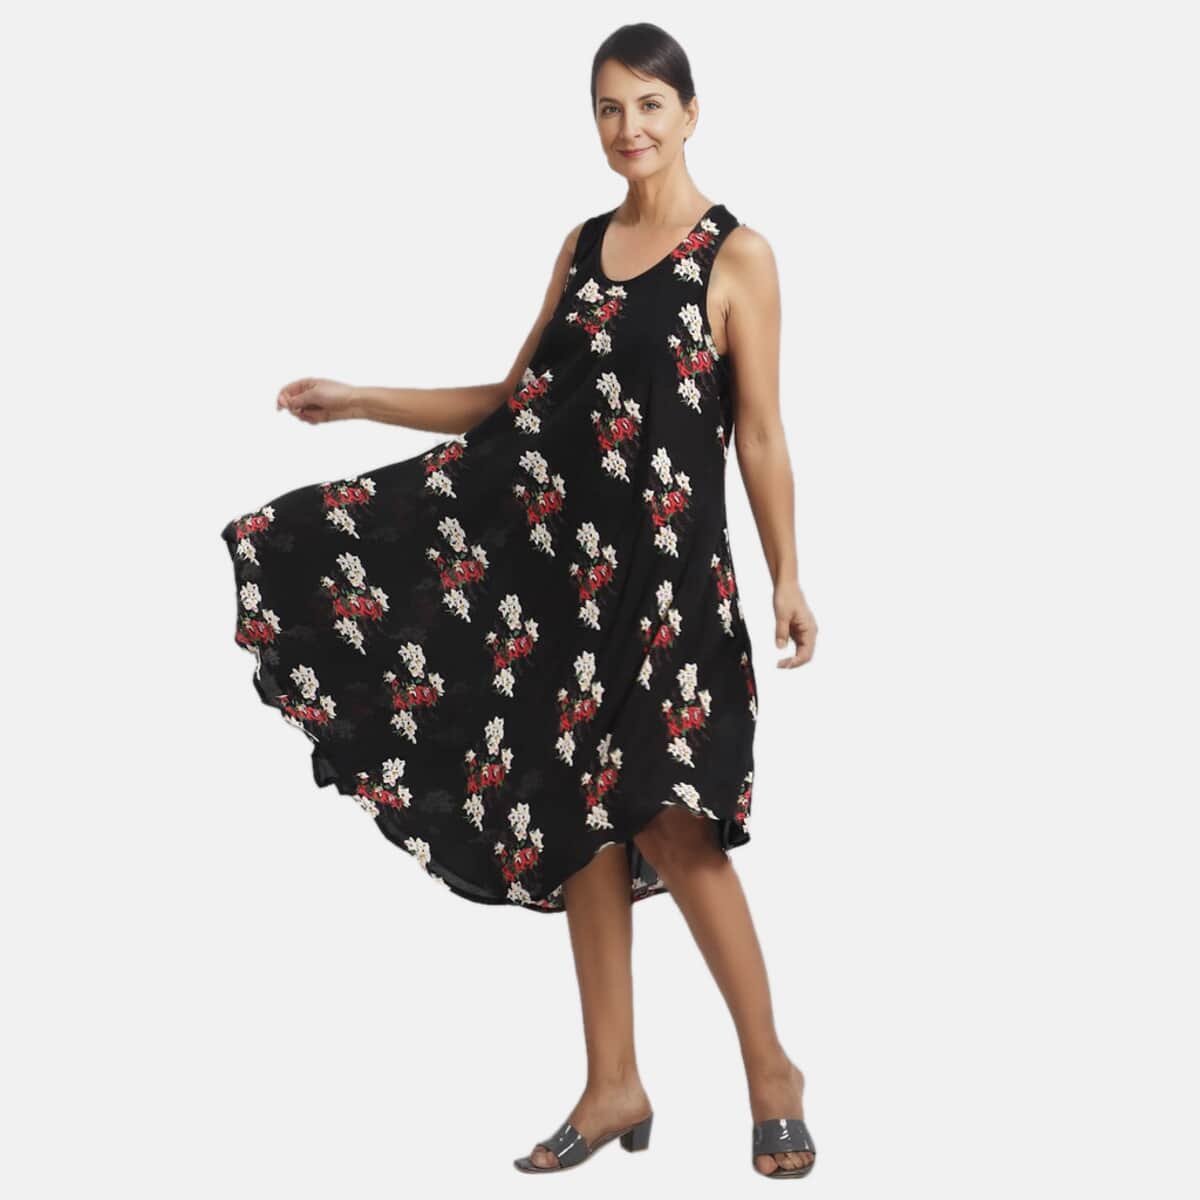 TAMSY Black Women's Repeat Floral Print Umbrella Dress -One Size Missy (44"x23") image number 3